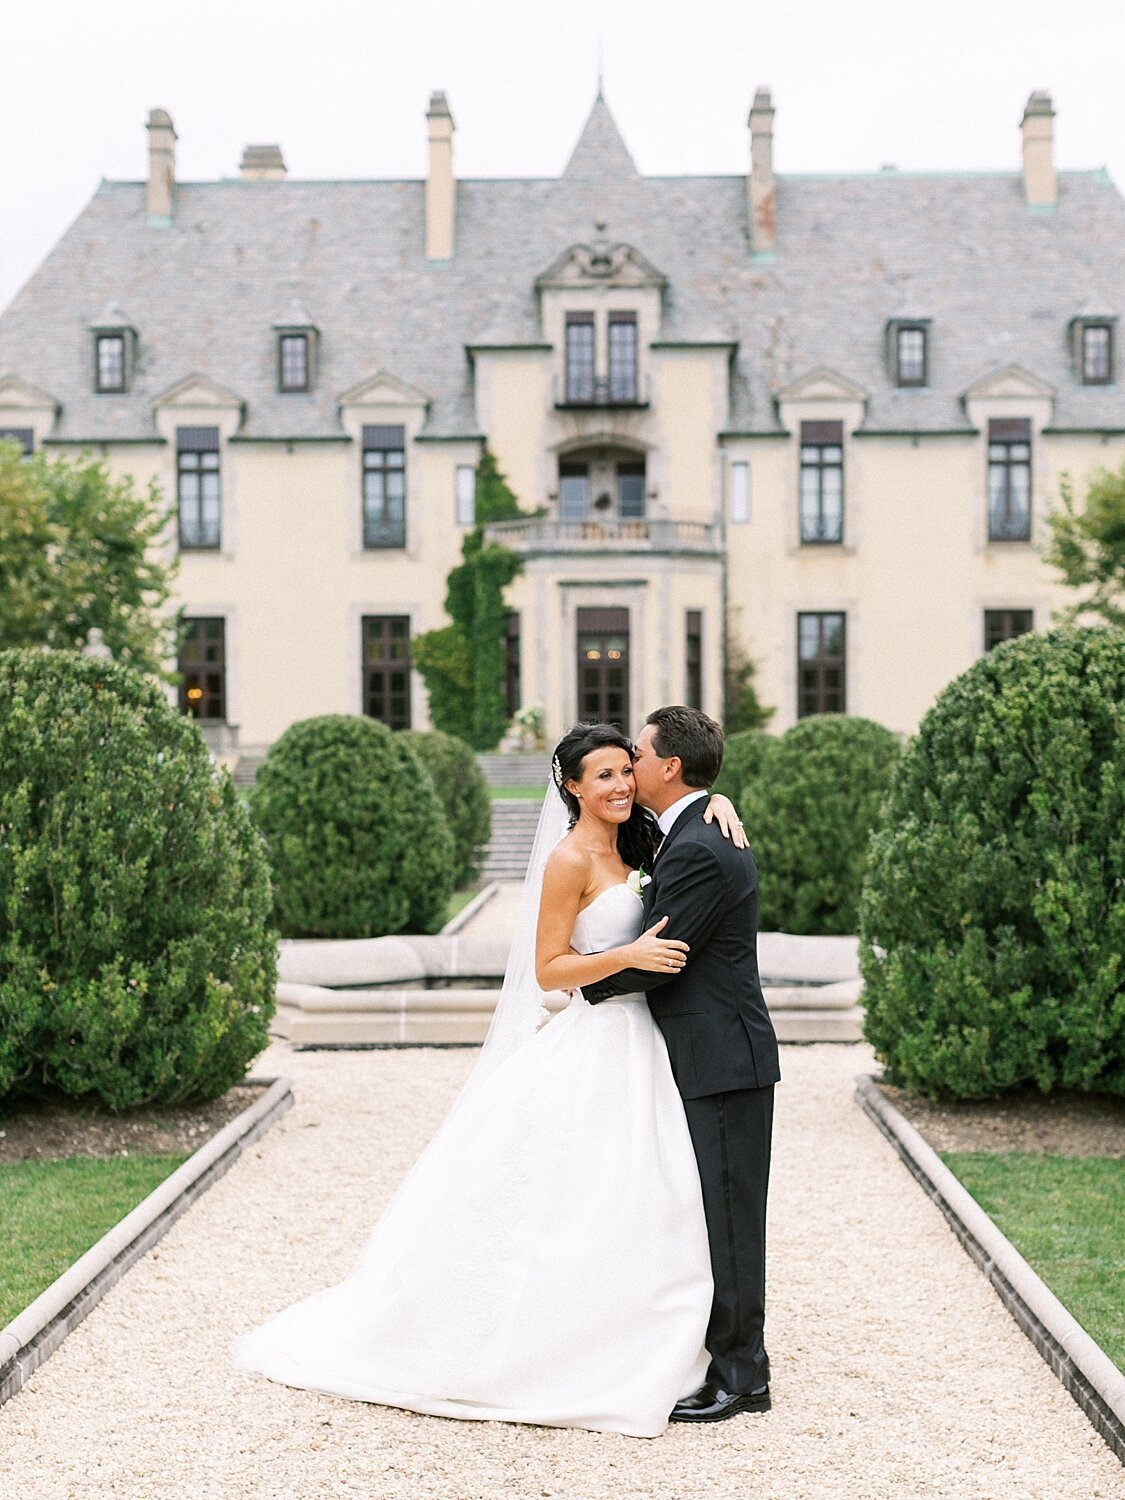 Oheka Castle wedding day photographed by Asher Gardner Photography